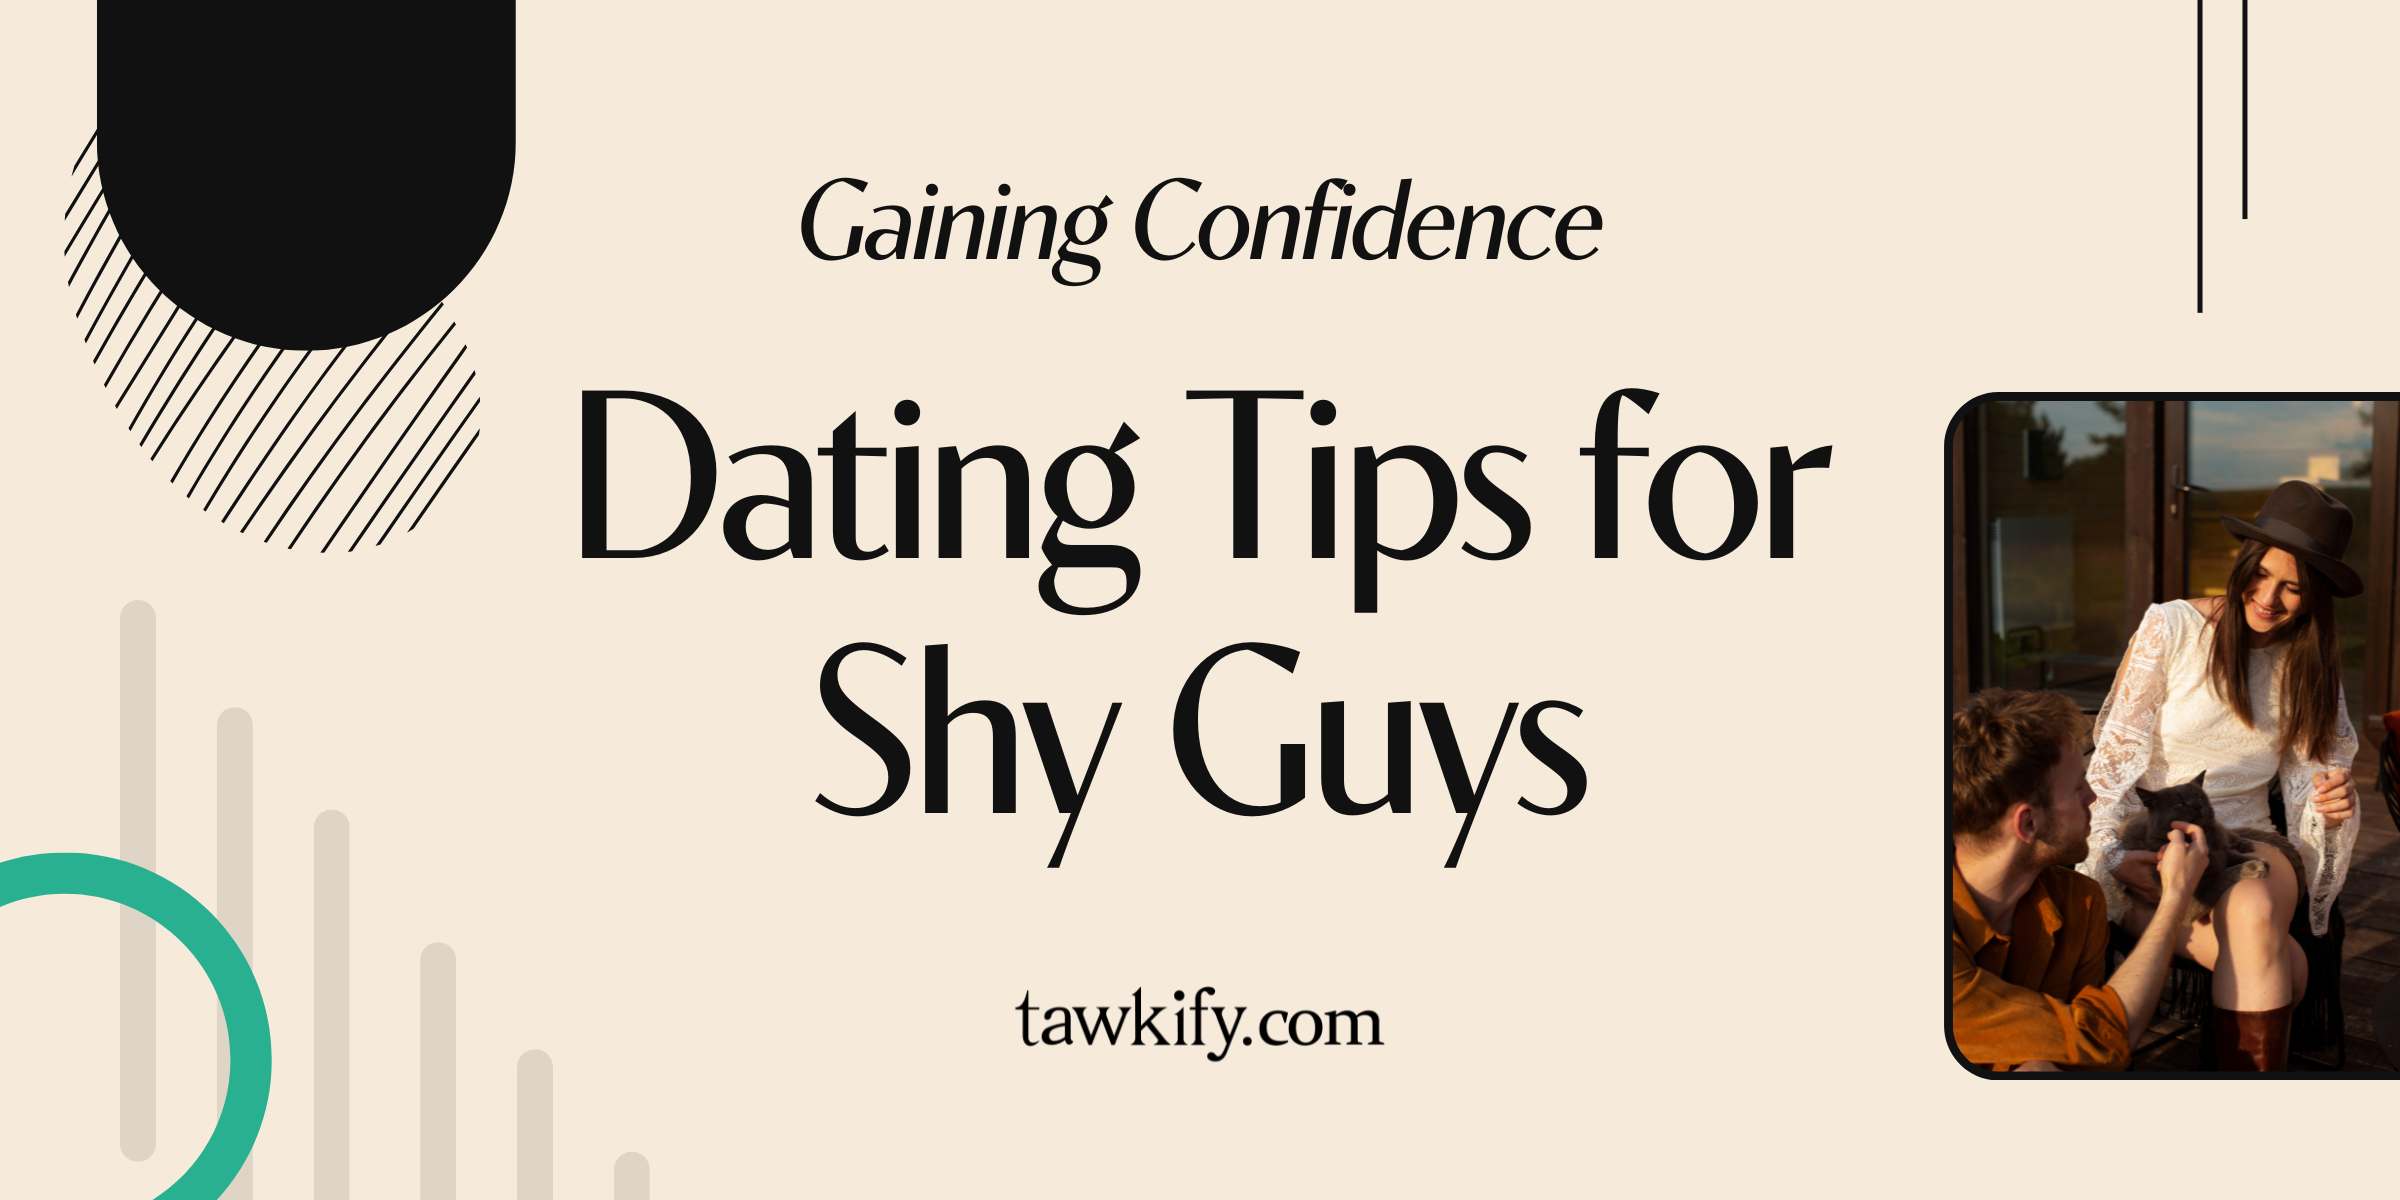 Find your perfect match with these dating tips for shy guys. Boost your confidence, learn how to make conversation like a pro, and push your boundaries—learn more here!